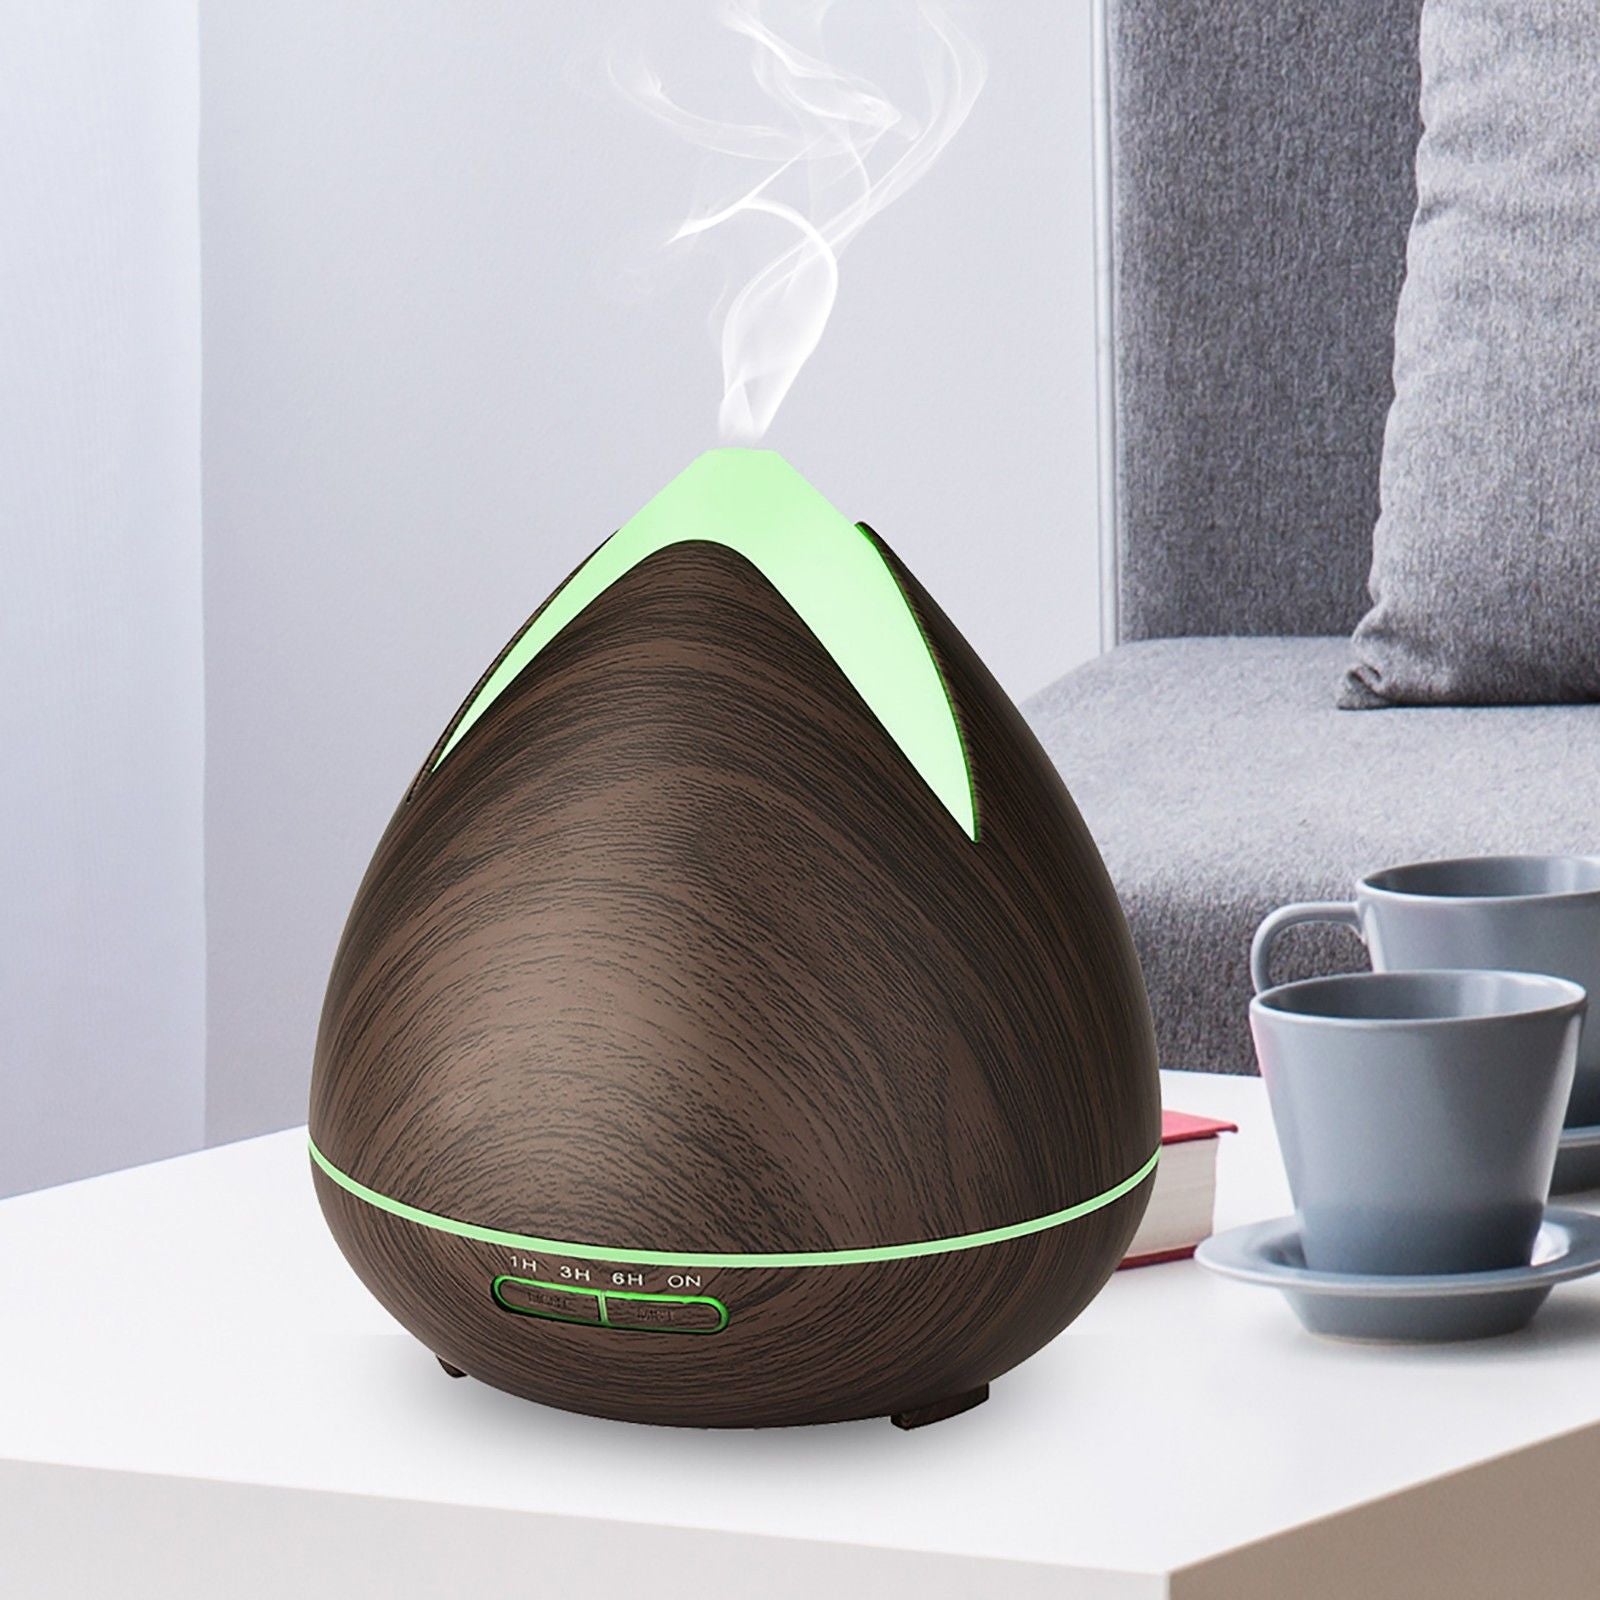 Essential Oils Ultrasonic Aromatherapy Diffuser Air Humidifier Purify 400ML - Dark Wood Deals499